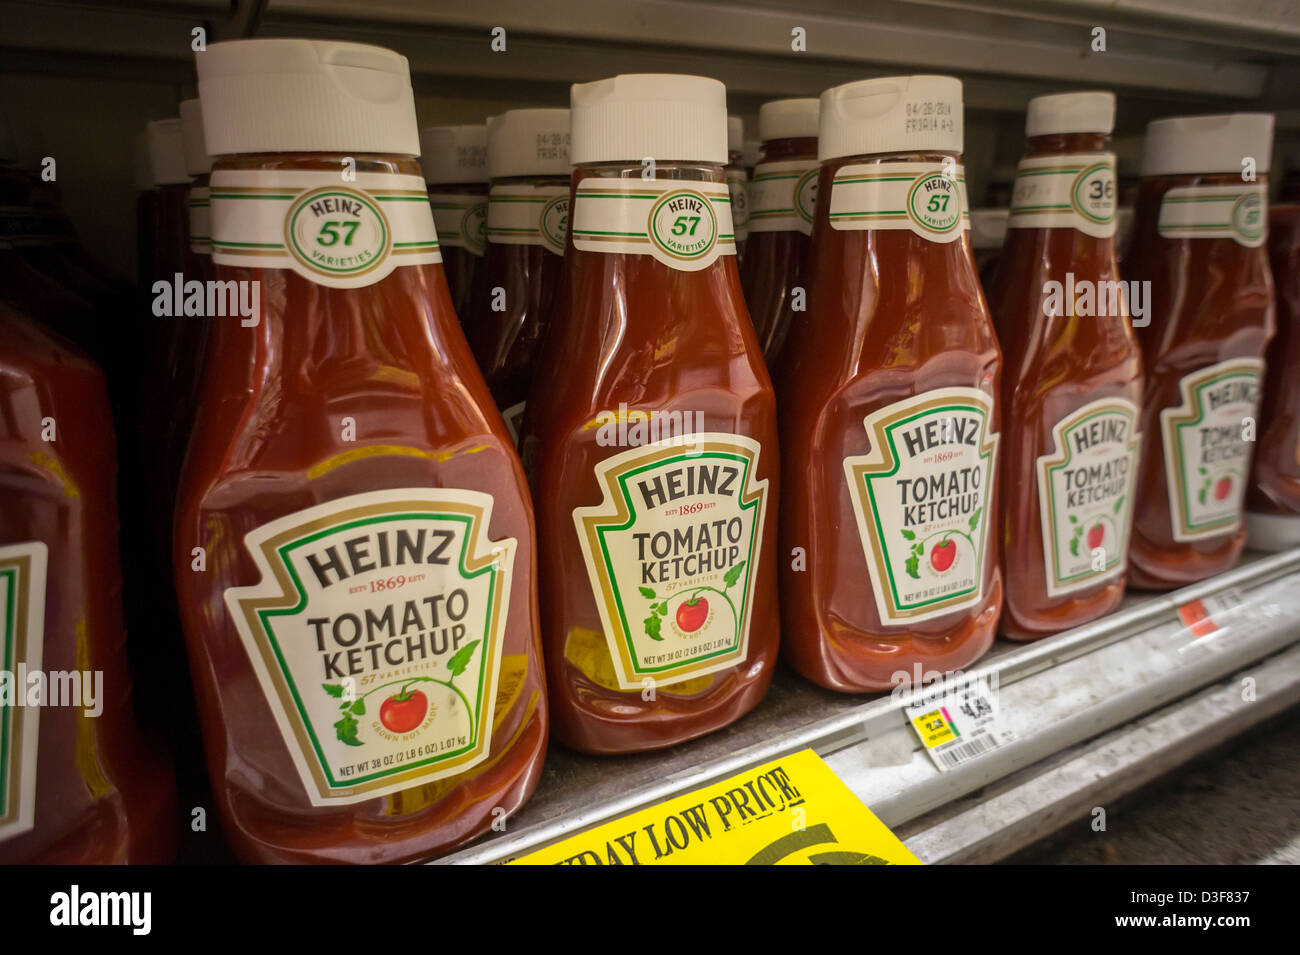 Heinz Tomato Ketchup in a supermarket Stock Photo